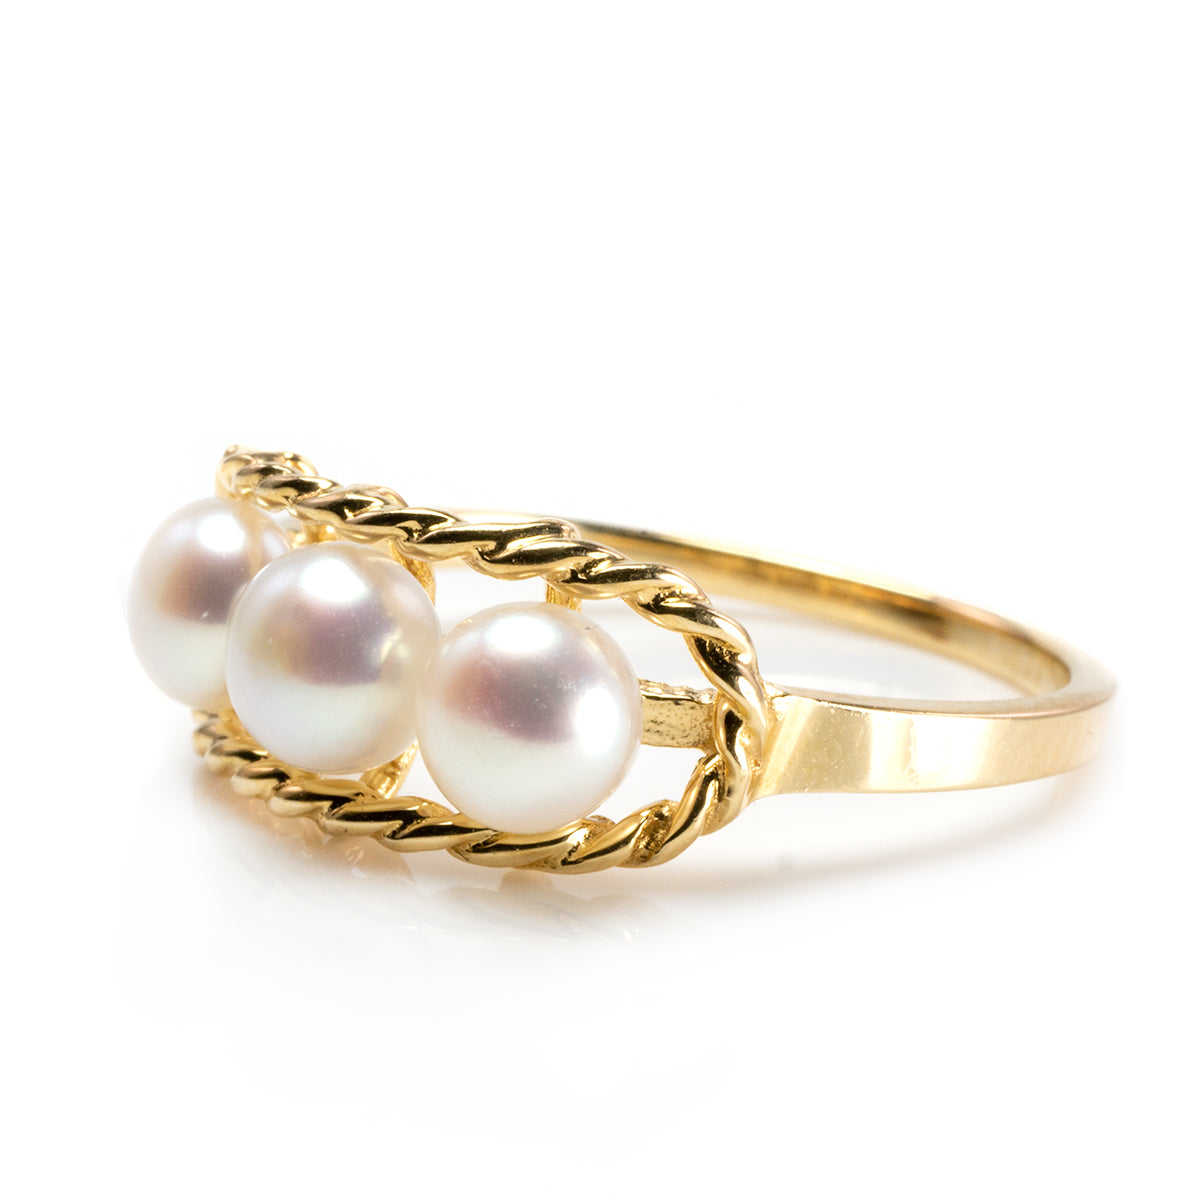 Cultured Freshwater Pearl Ring with Filigree Design Sterling Silver –  AzureBella Jewelry